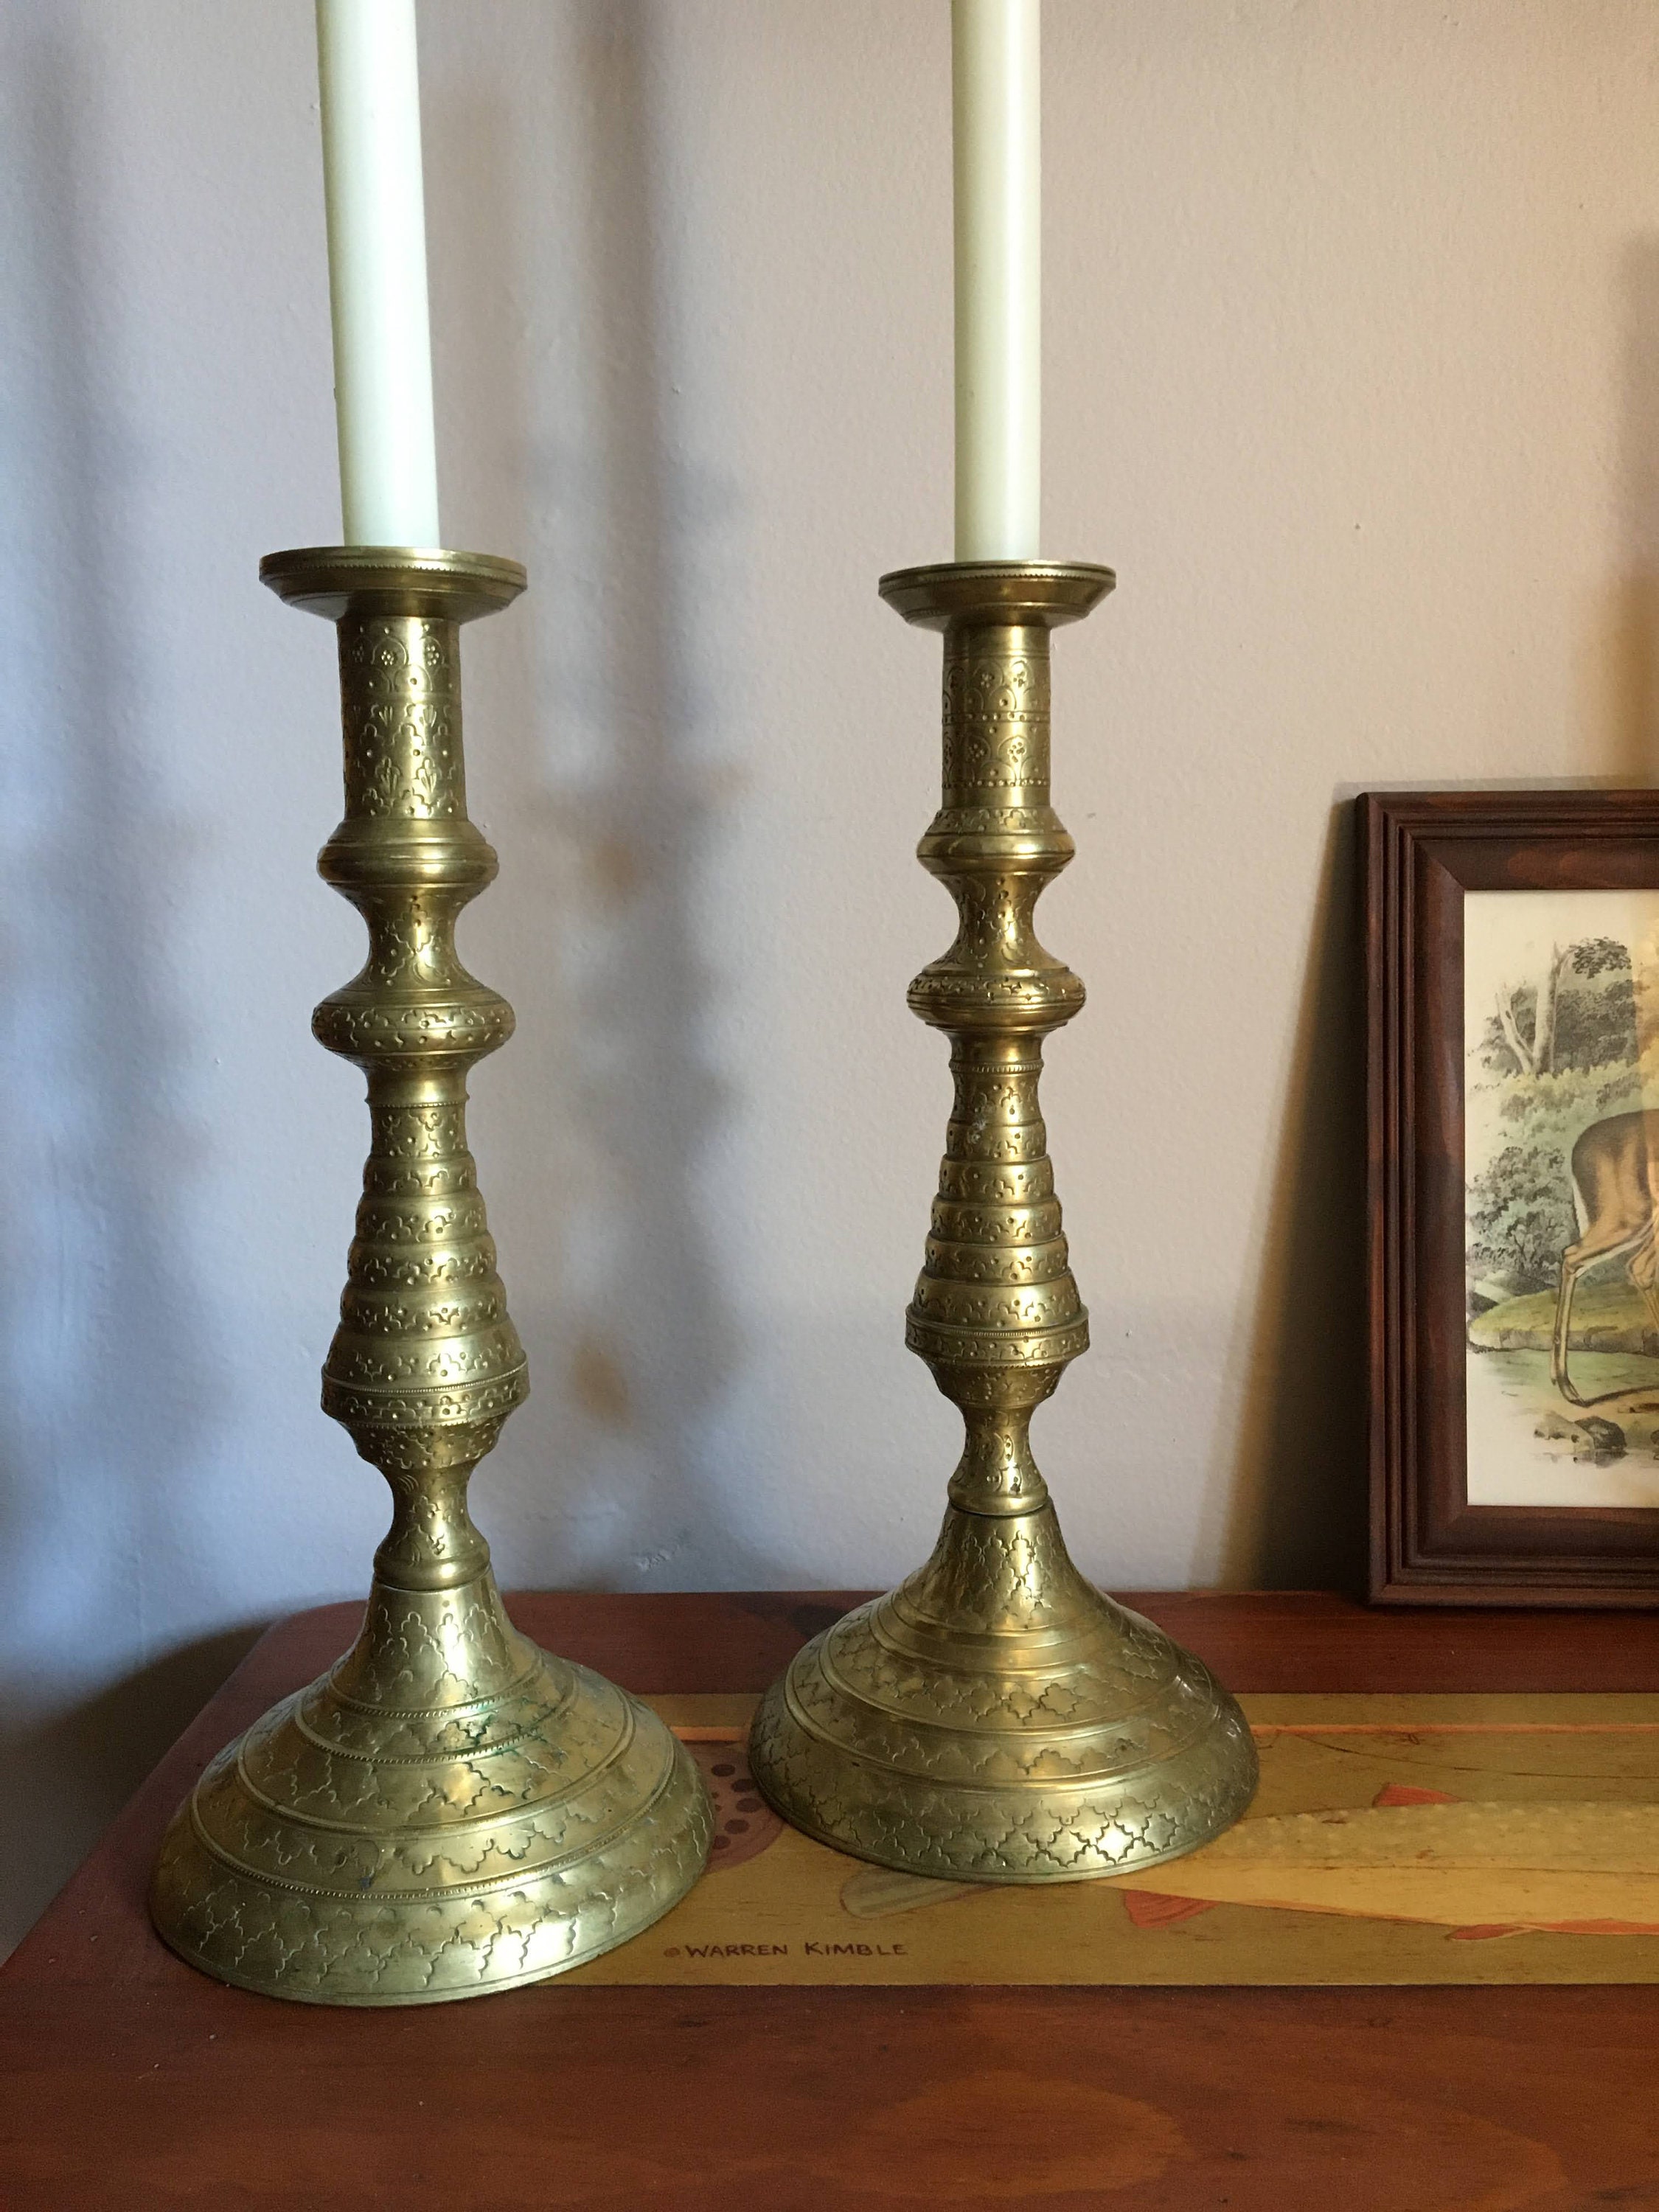 English Brass Push Up Beehive Candlestick For Sale on Ruby Lane